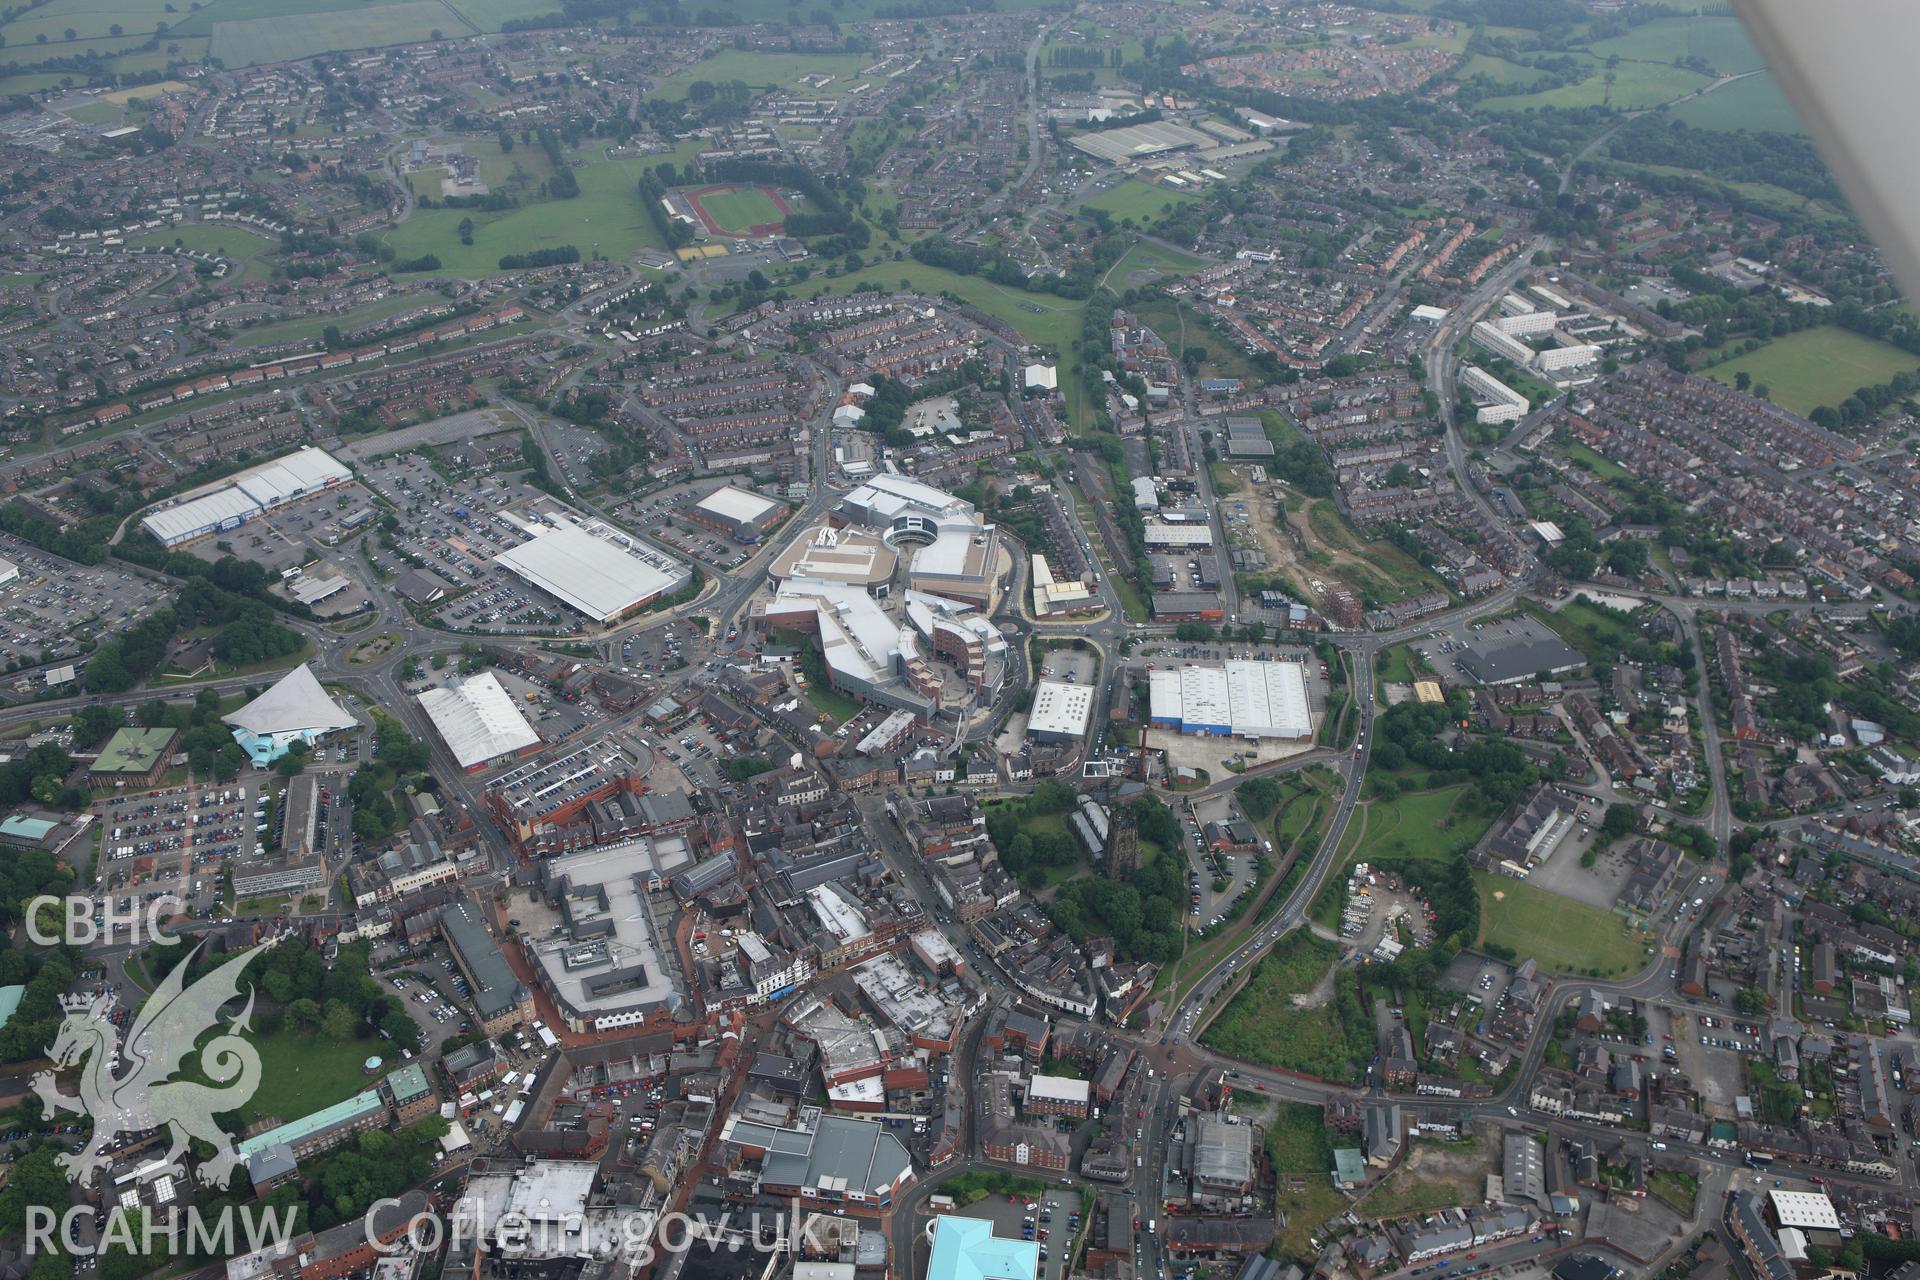 RCAHMW colour oblique aerial photograph of Wrexham showing the town centre. Taken on 29 June 2009 by Toby Driver